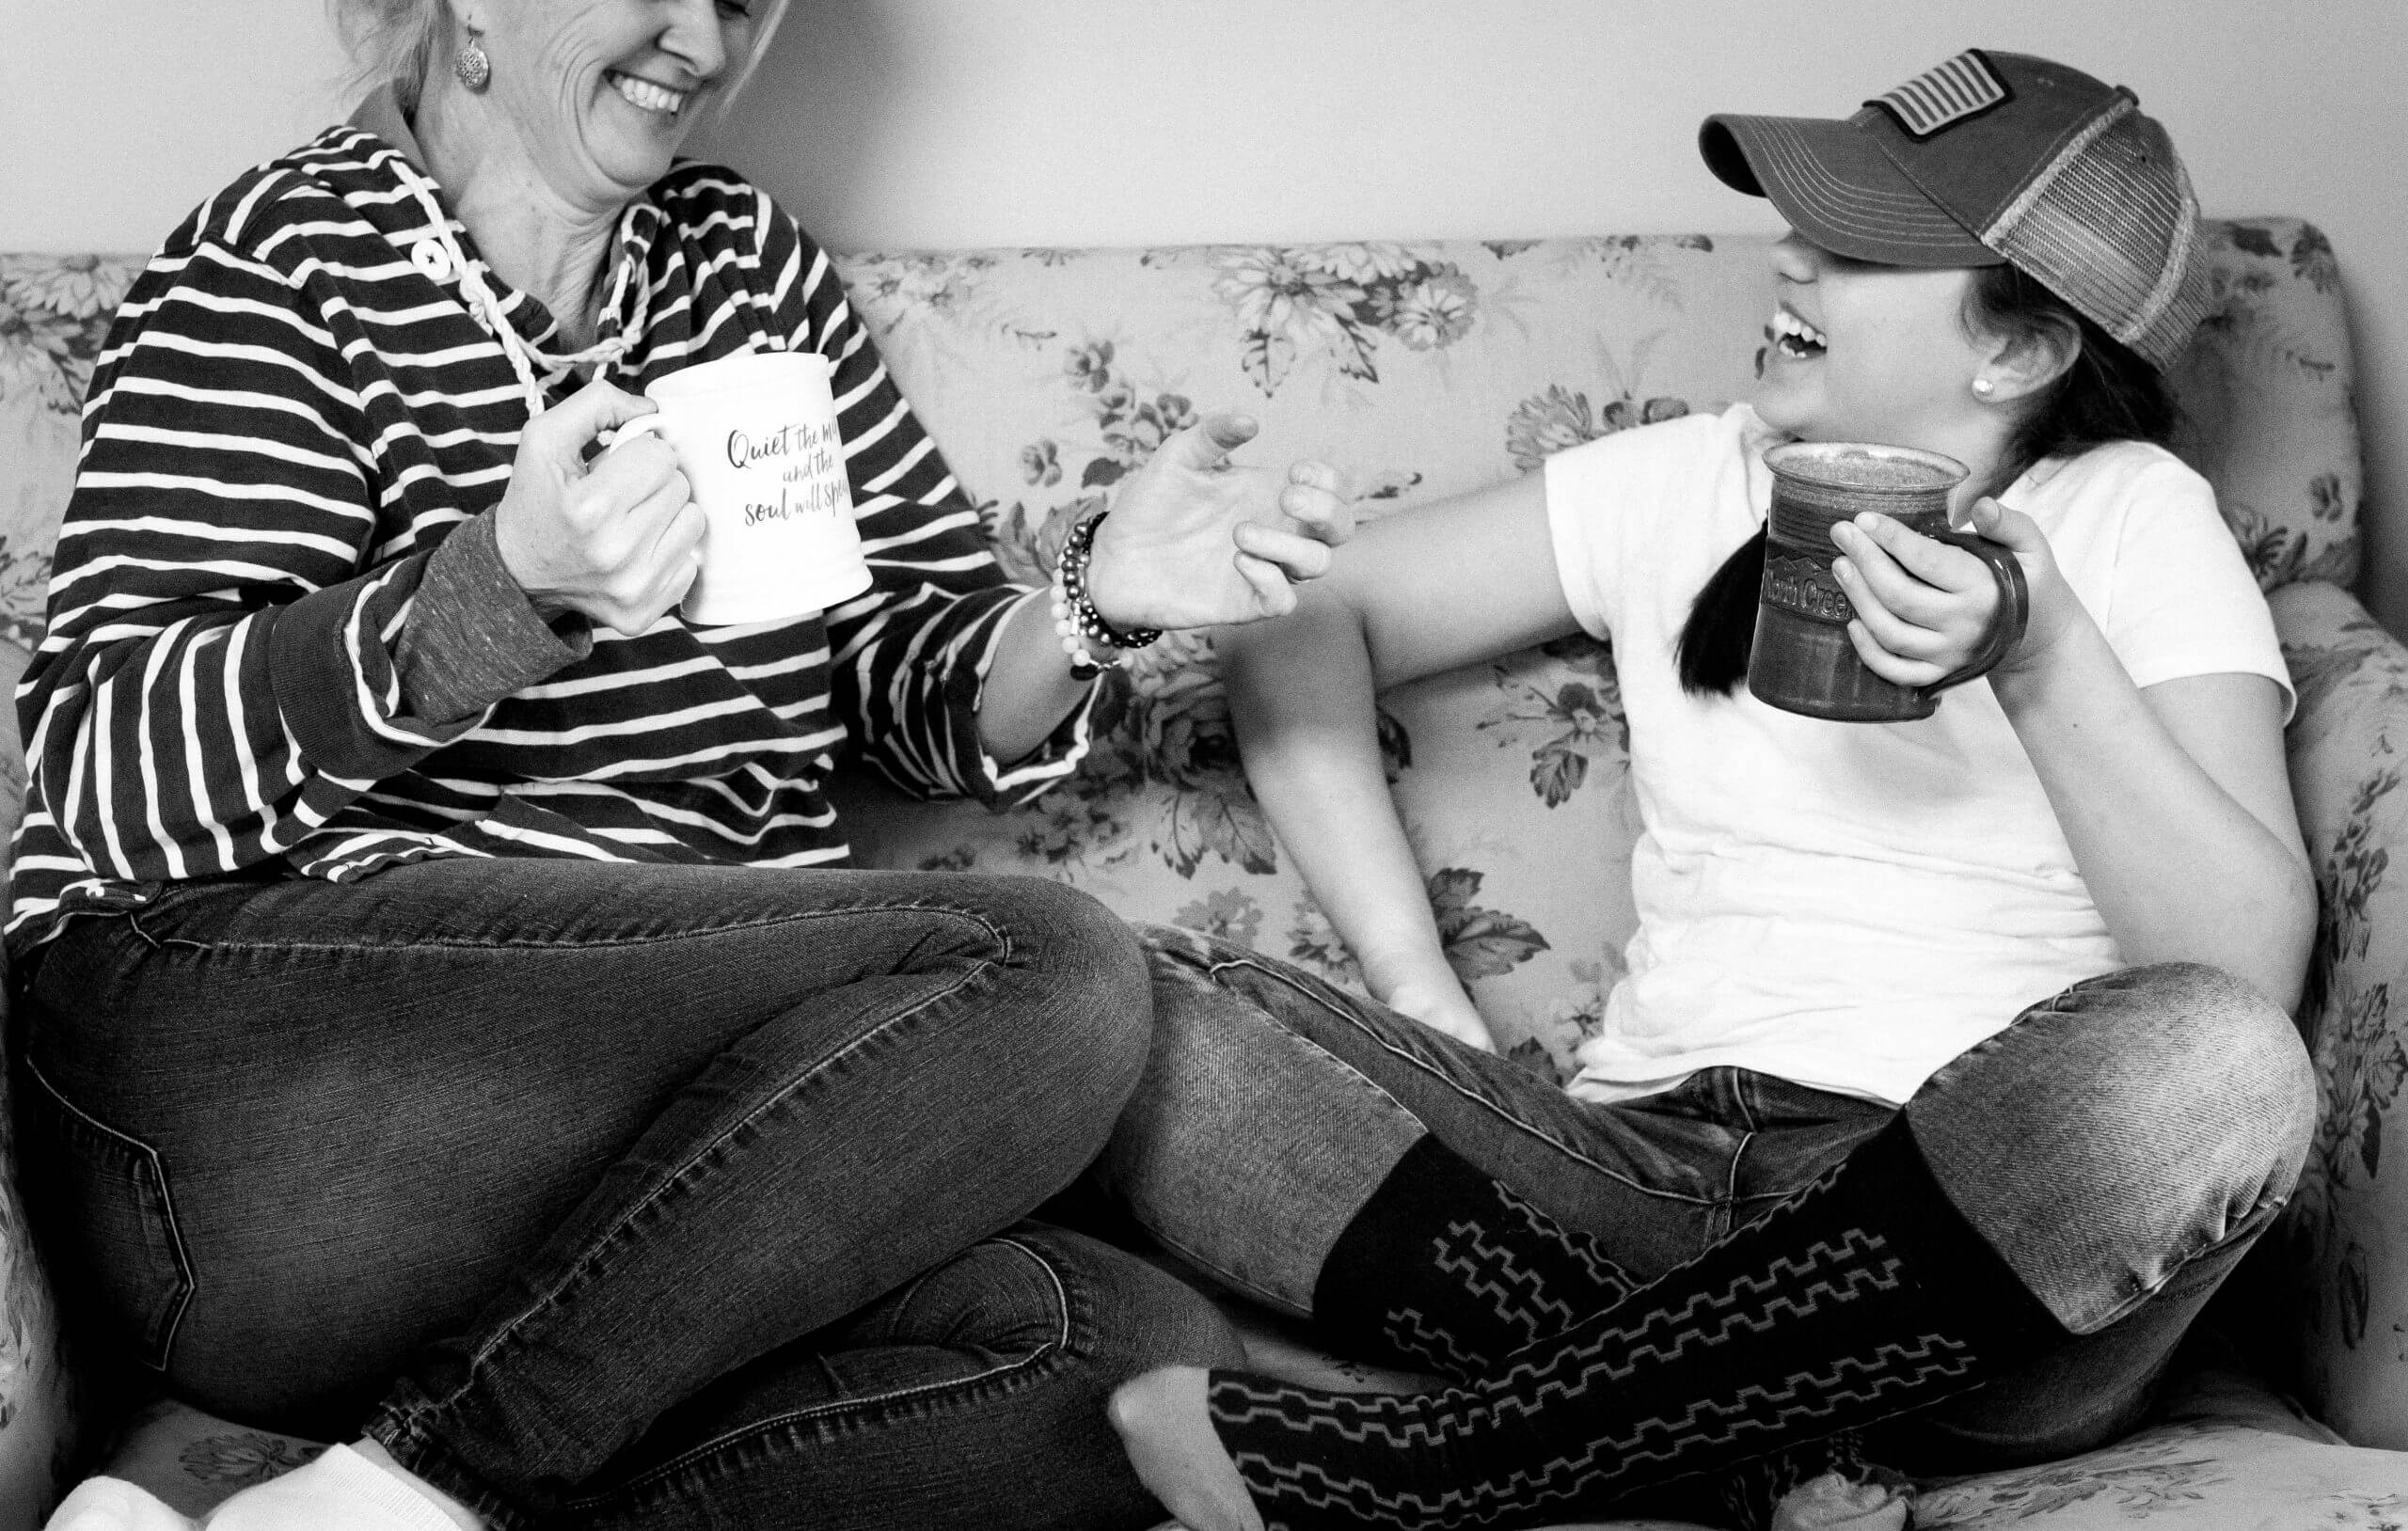 A woman and a child sit on a couch holding mugs and laughing.